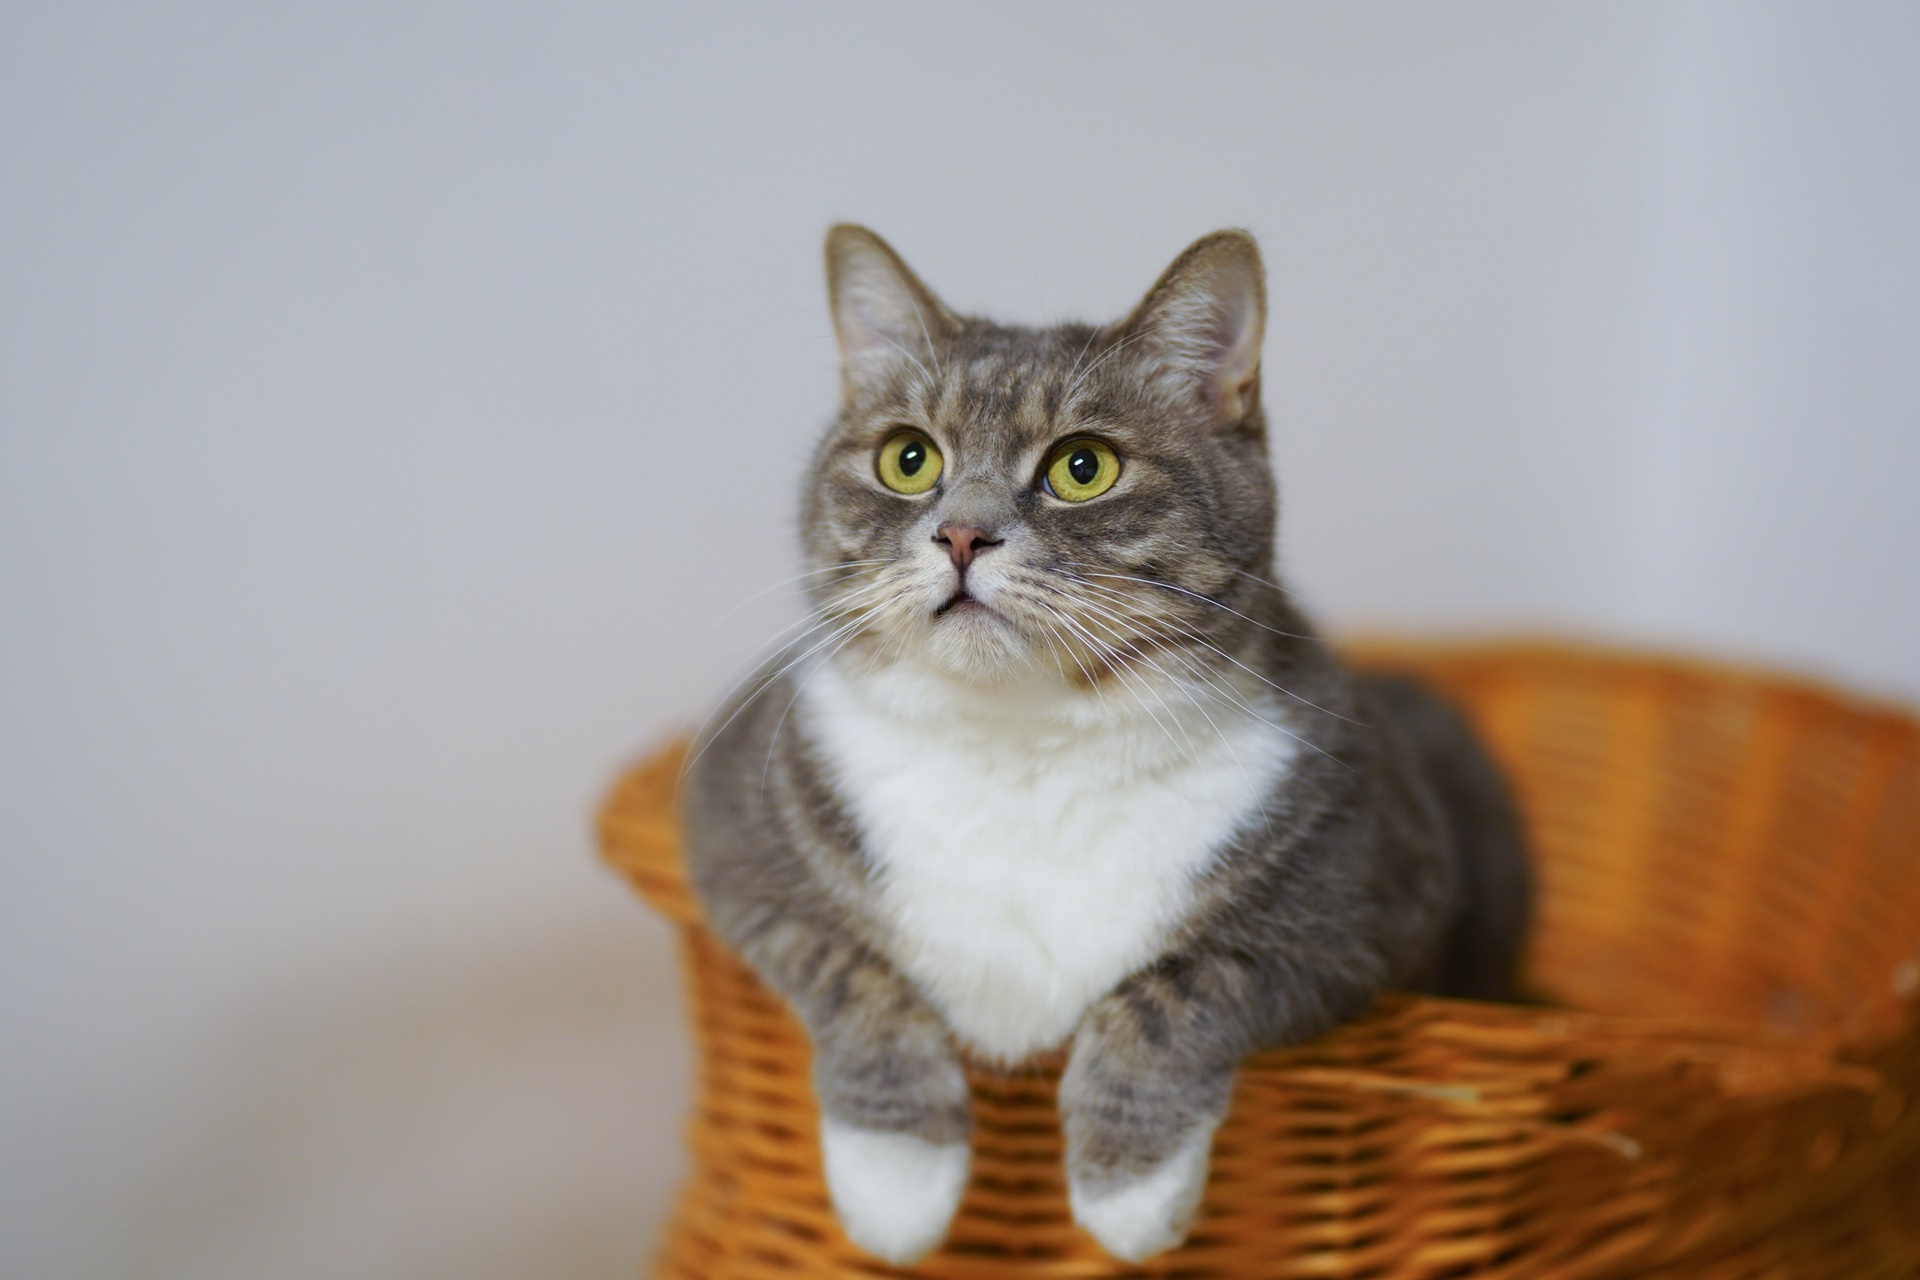 Cat-on-a-woven-basket